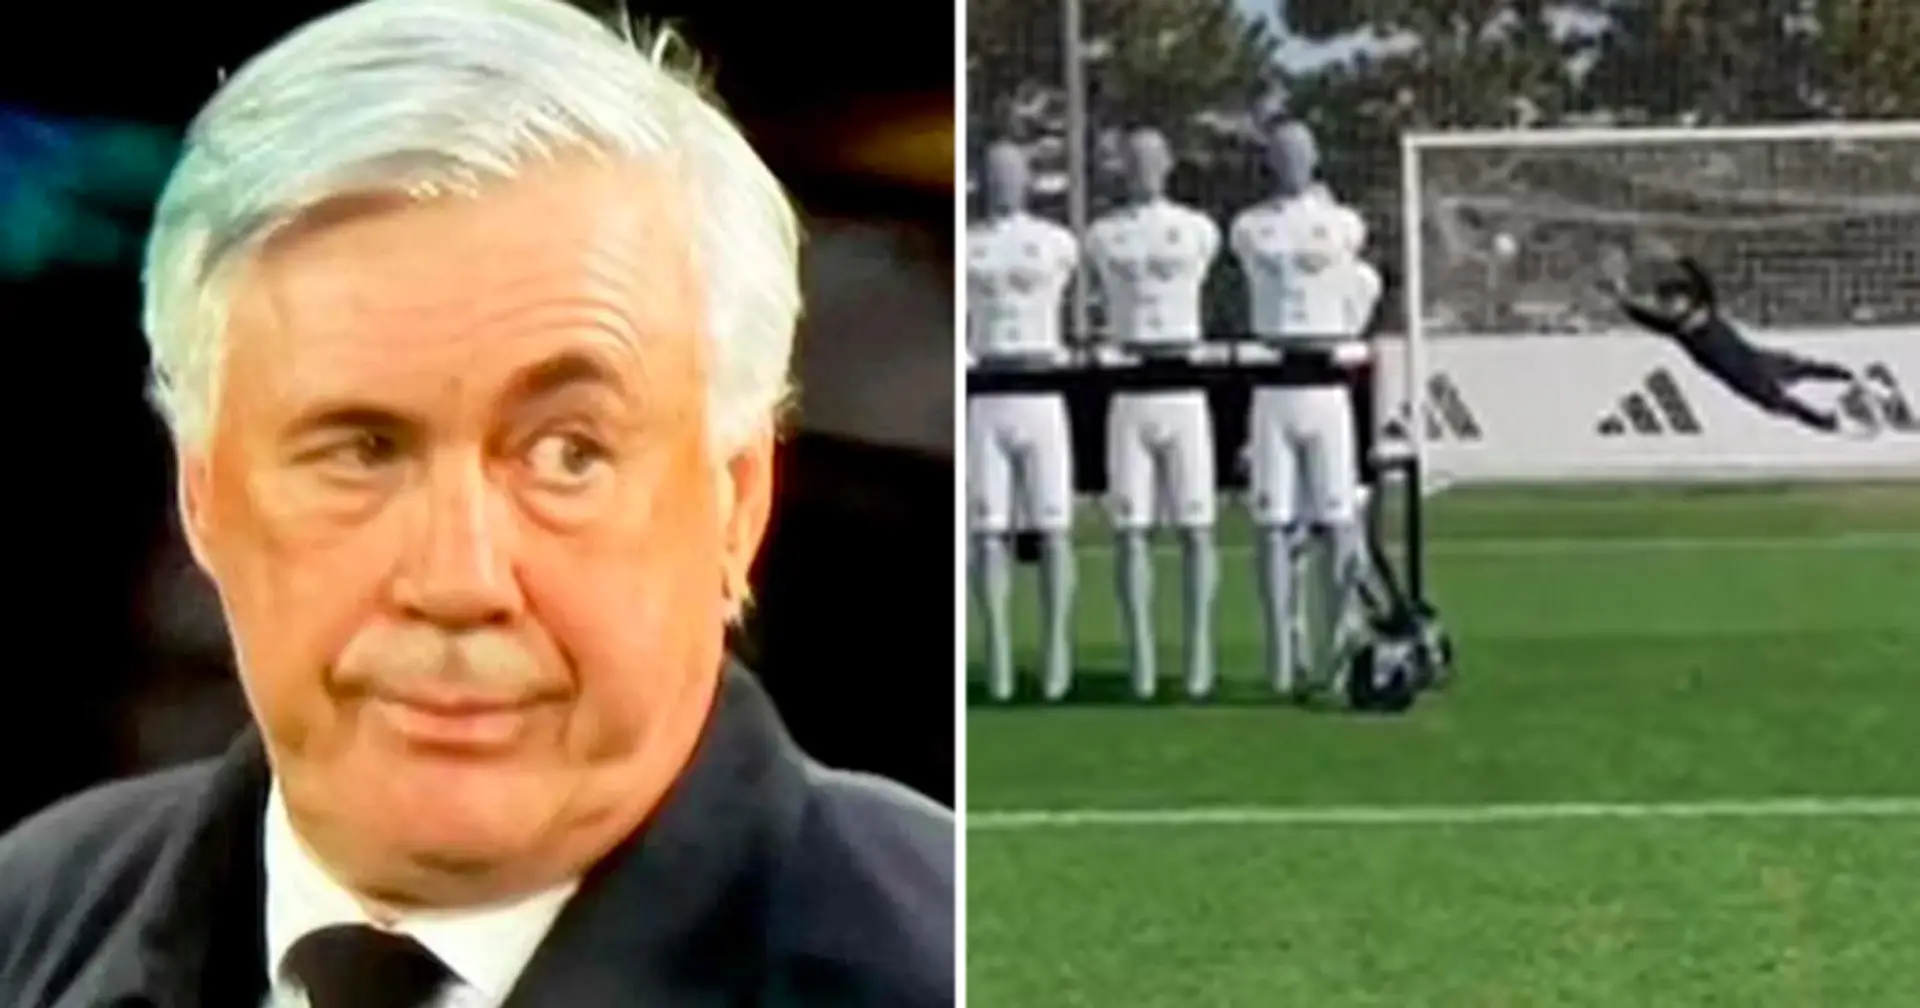 One Real Madrid player impresses teammates with free-kick routine in training – scores 3 in a row